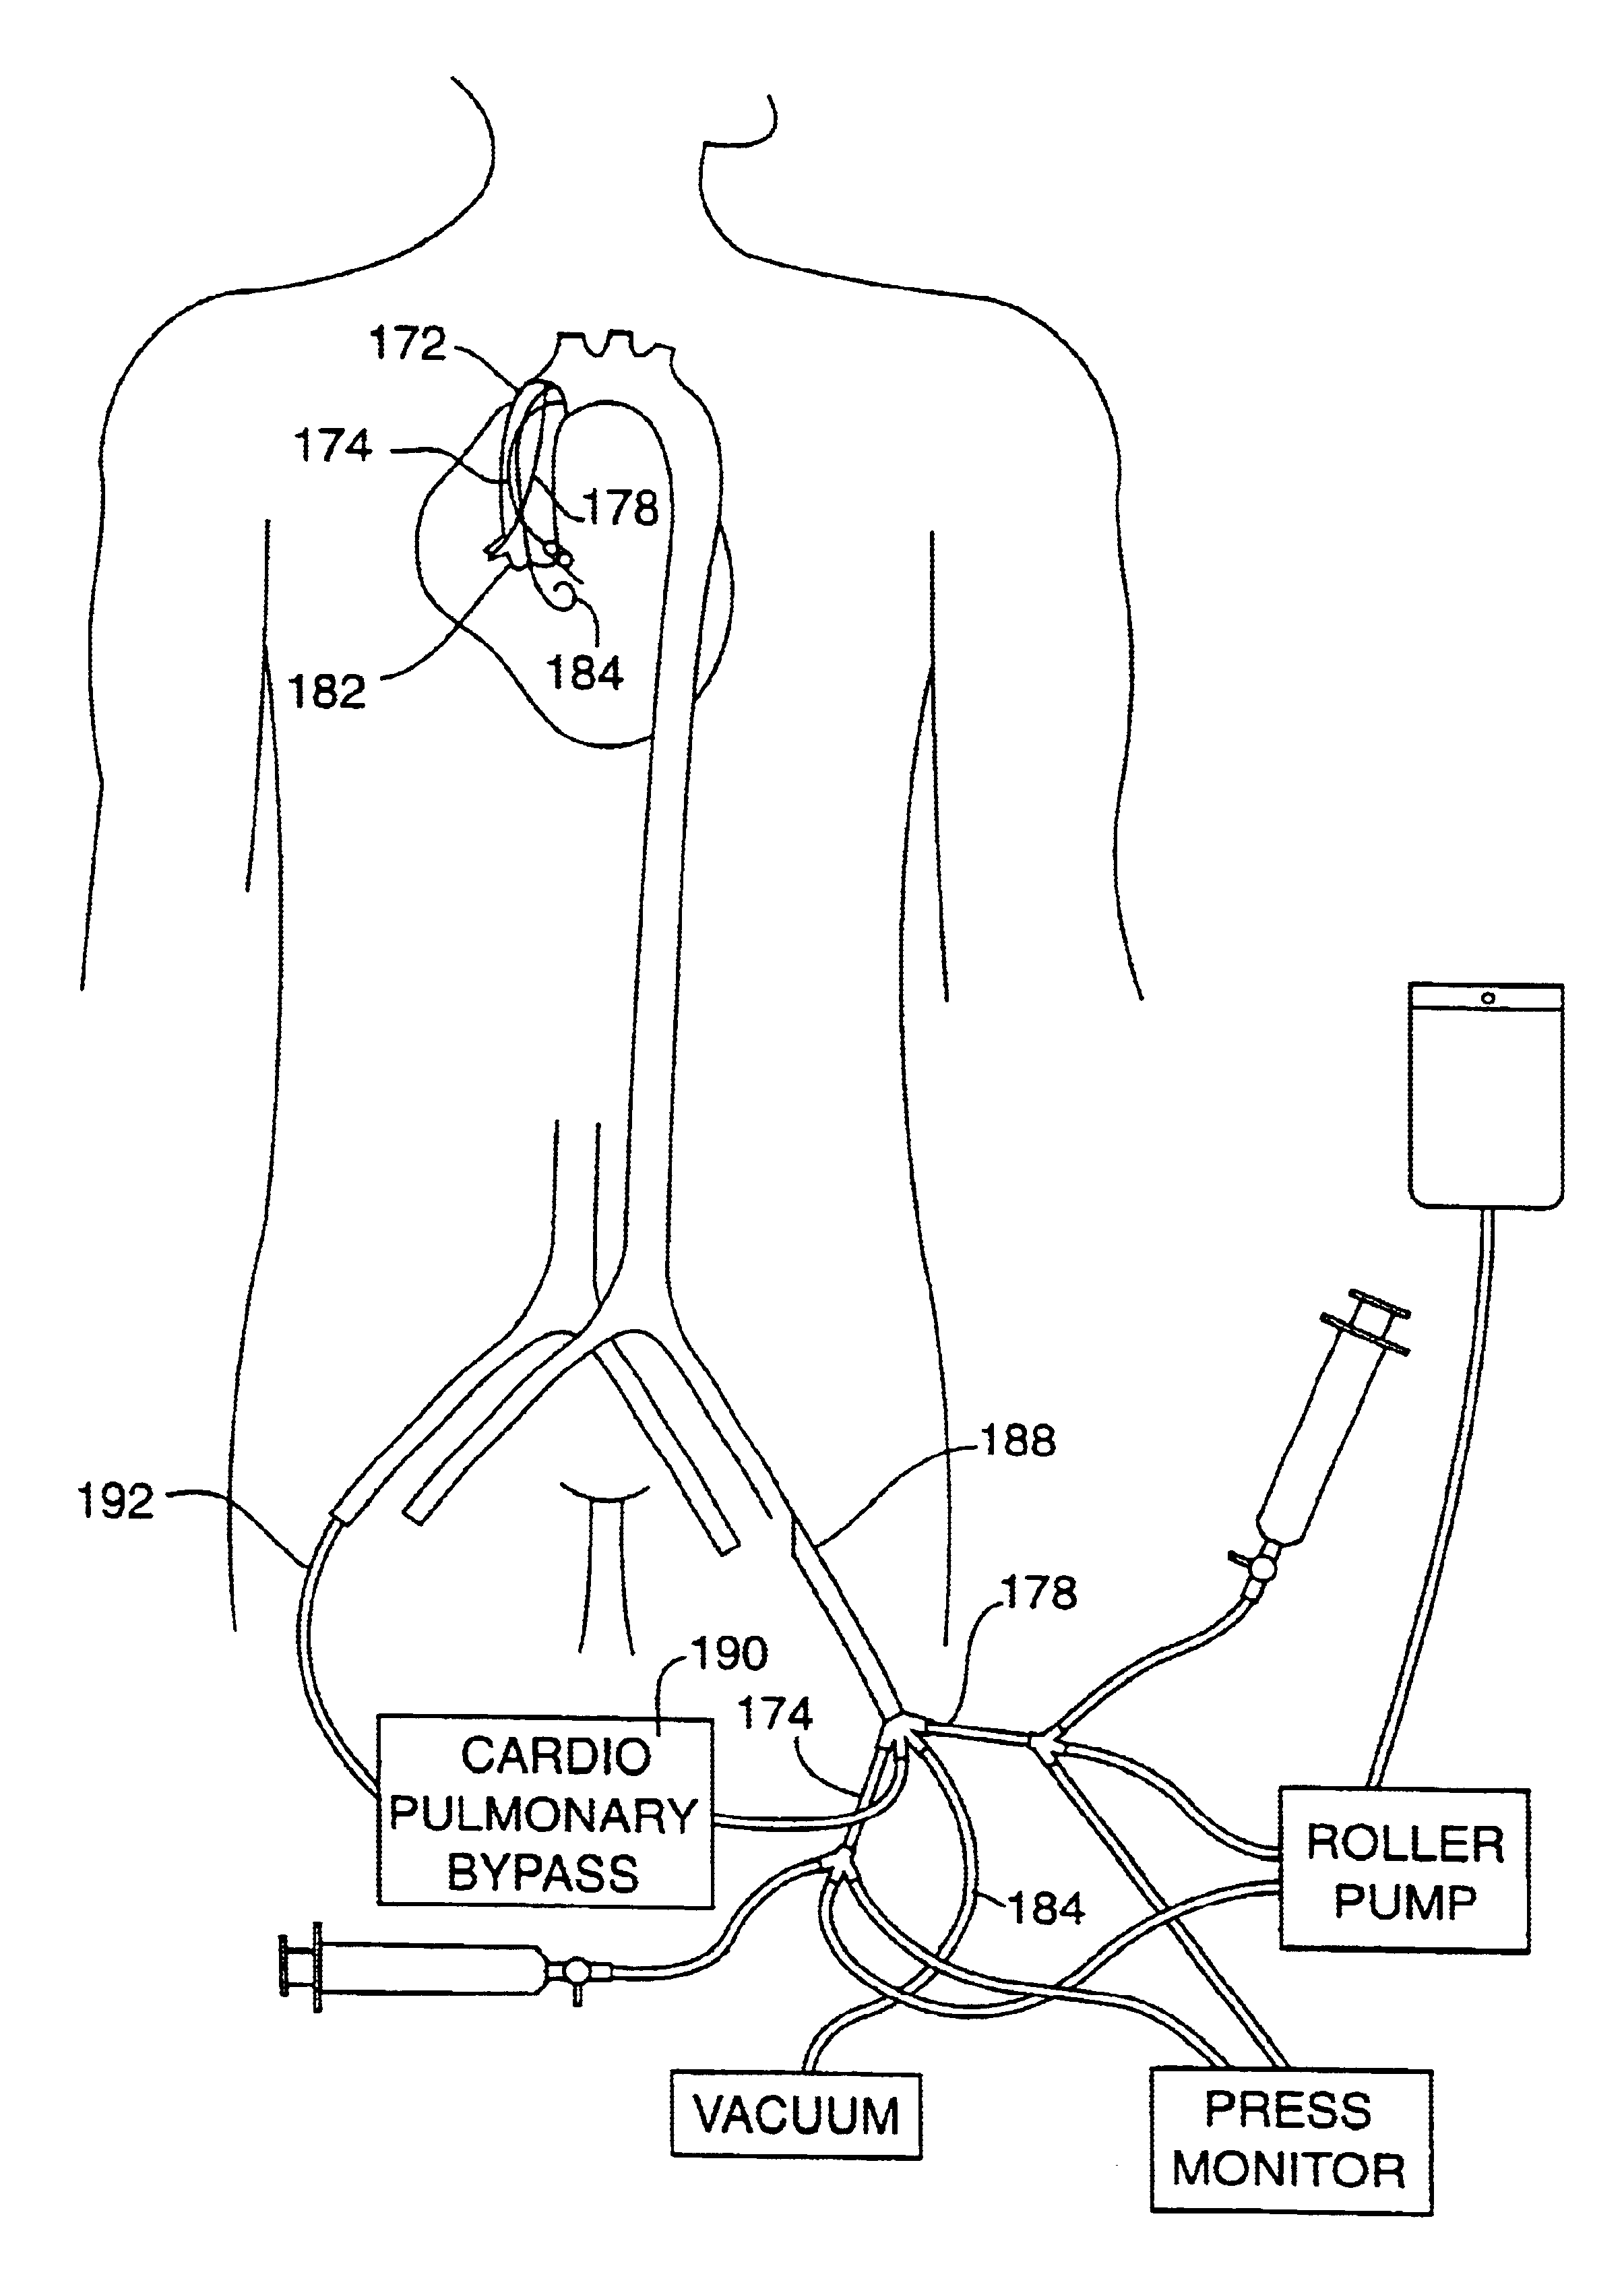 Method for delivering a fluid to the coronary ostia